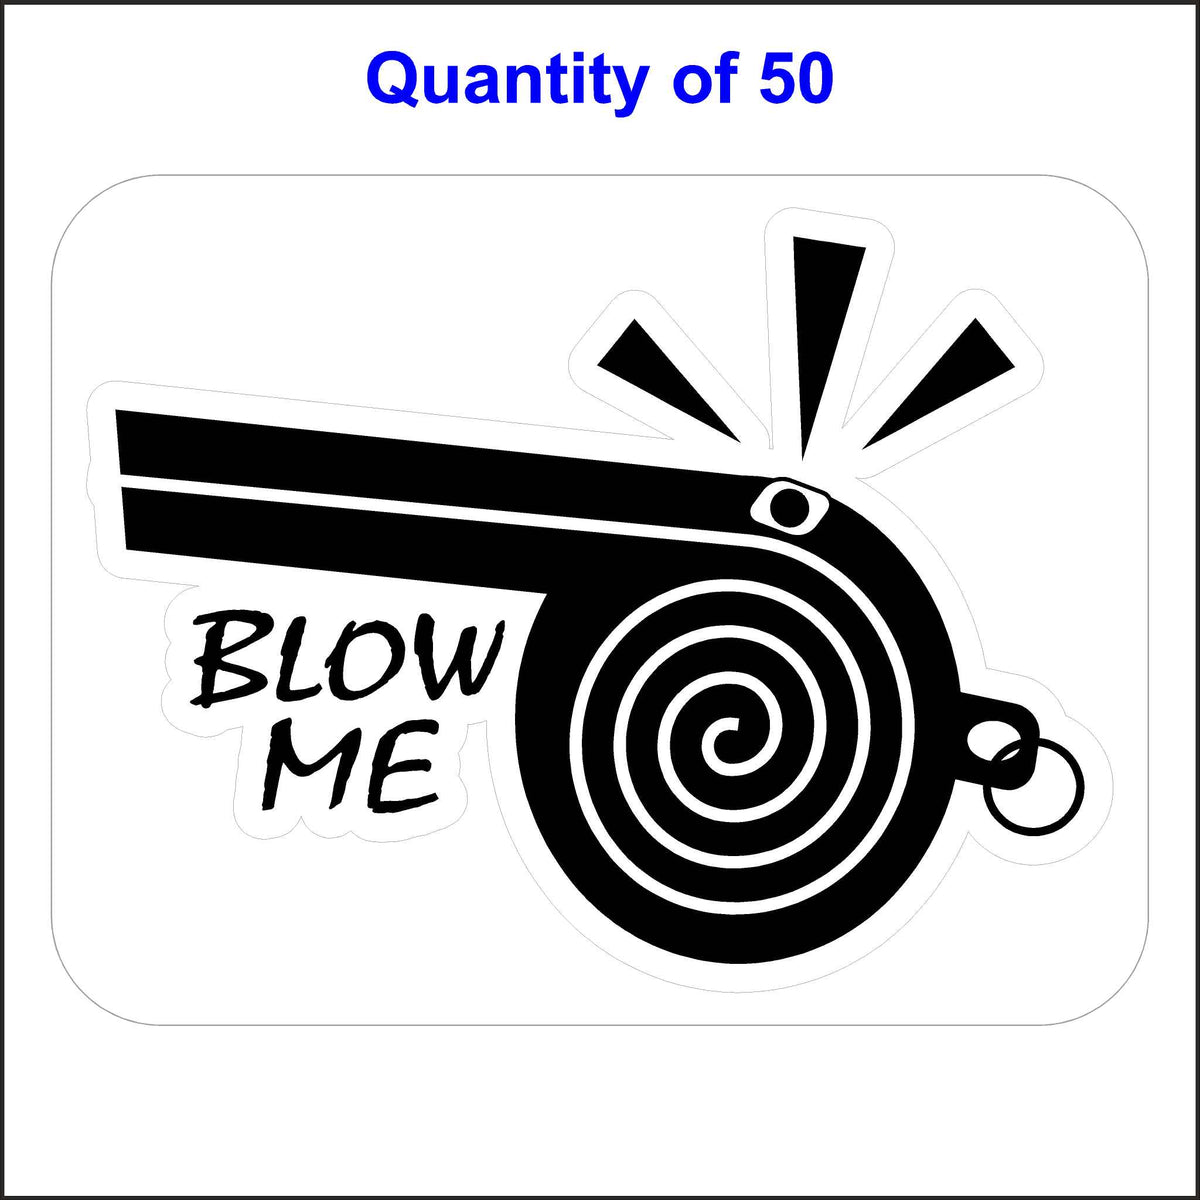 Whistle Blower Sticker, Blow Me Stickers. Black Whistle and the Words Blow Me on a White Background. 50 Quantity.